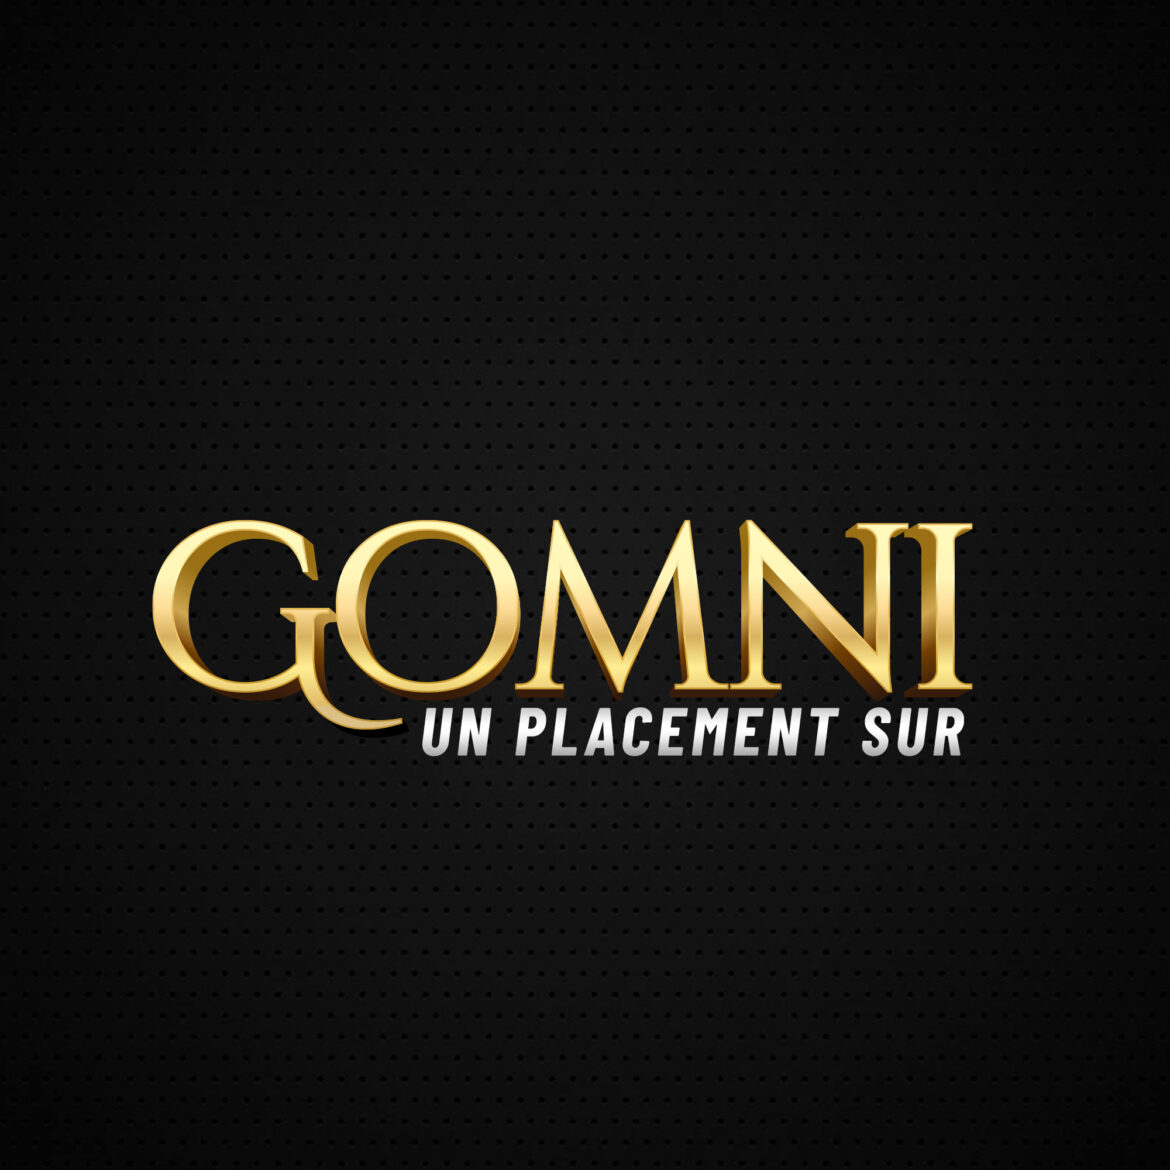 Launch of Gomni: the savings investment that combines security and return